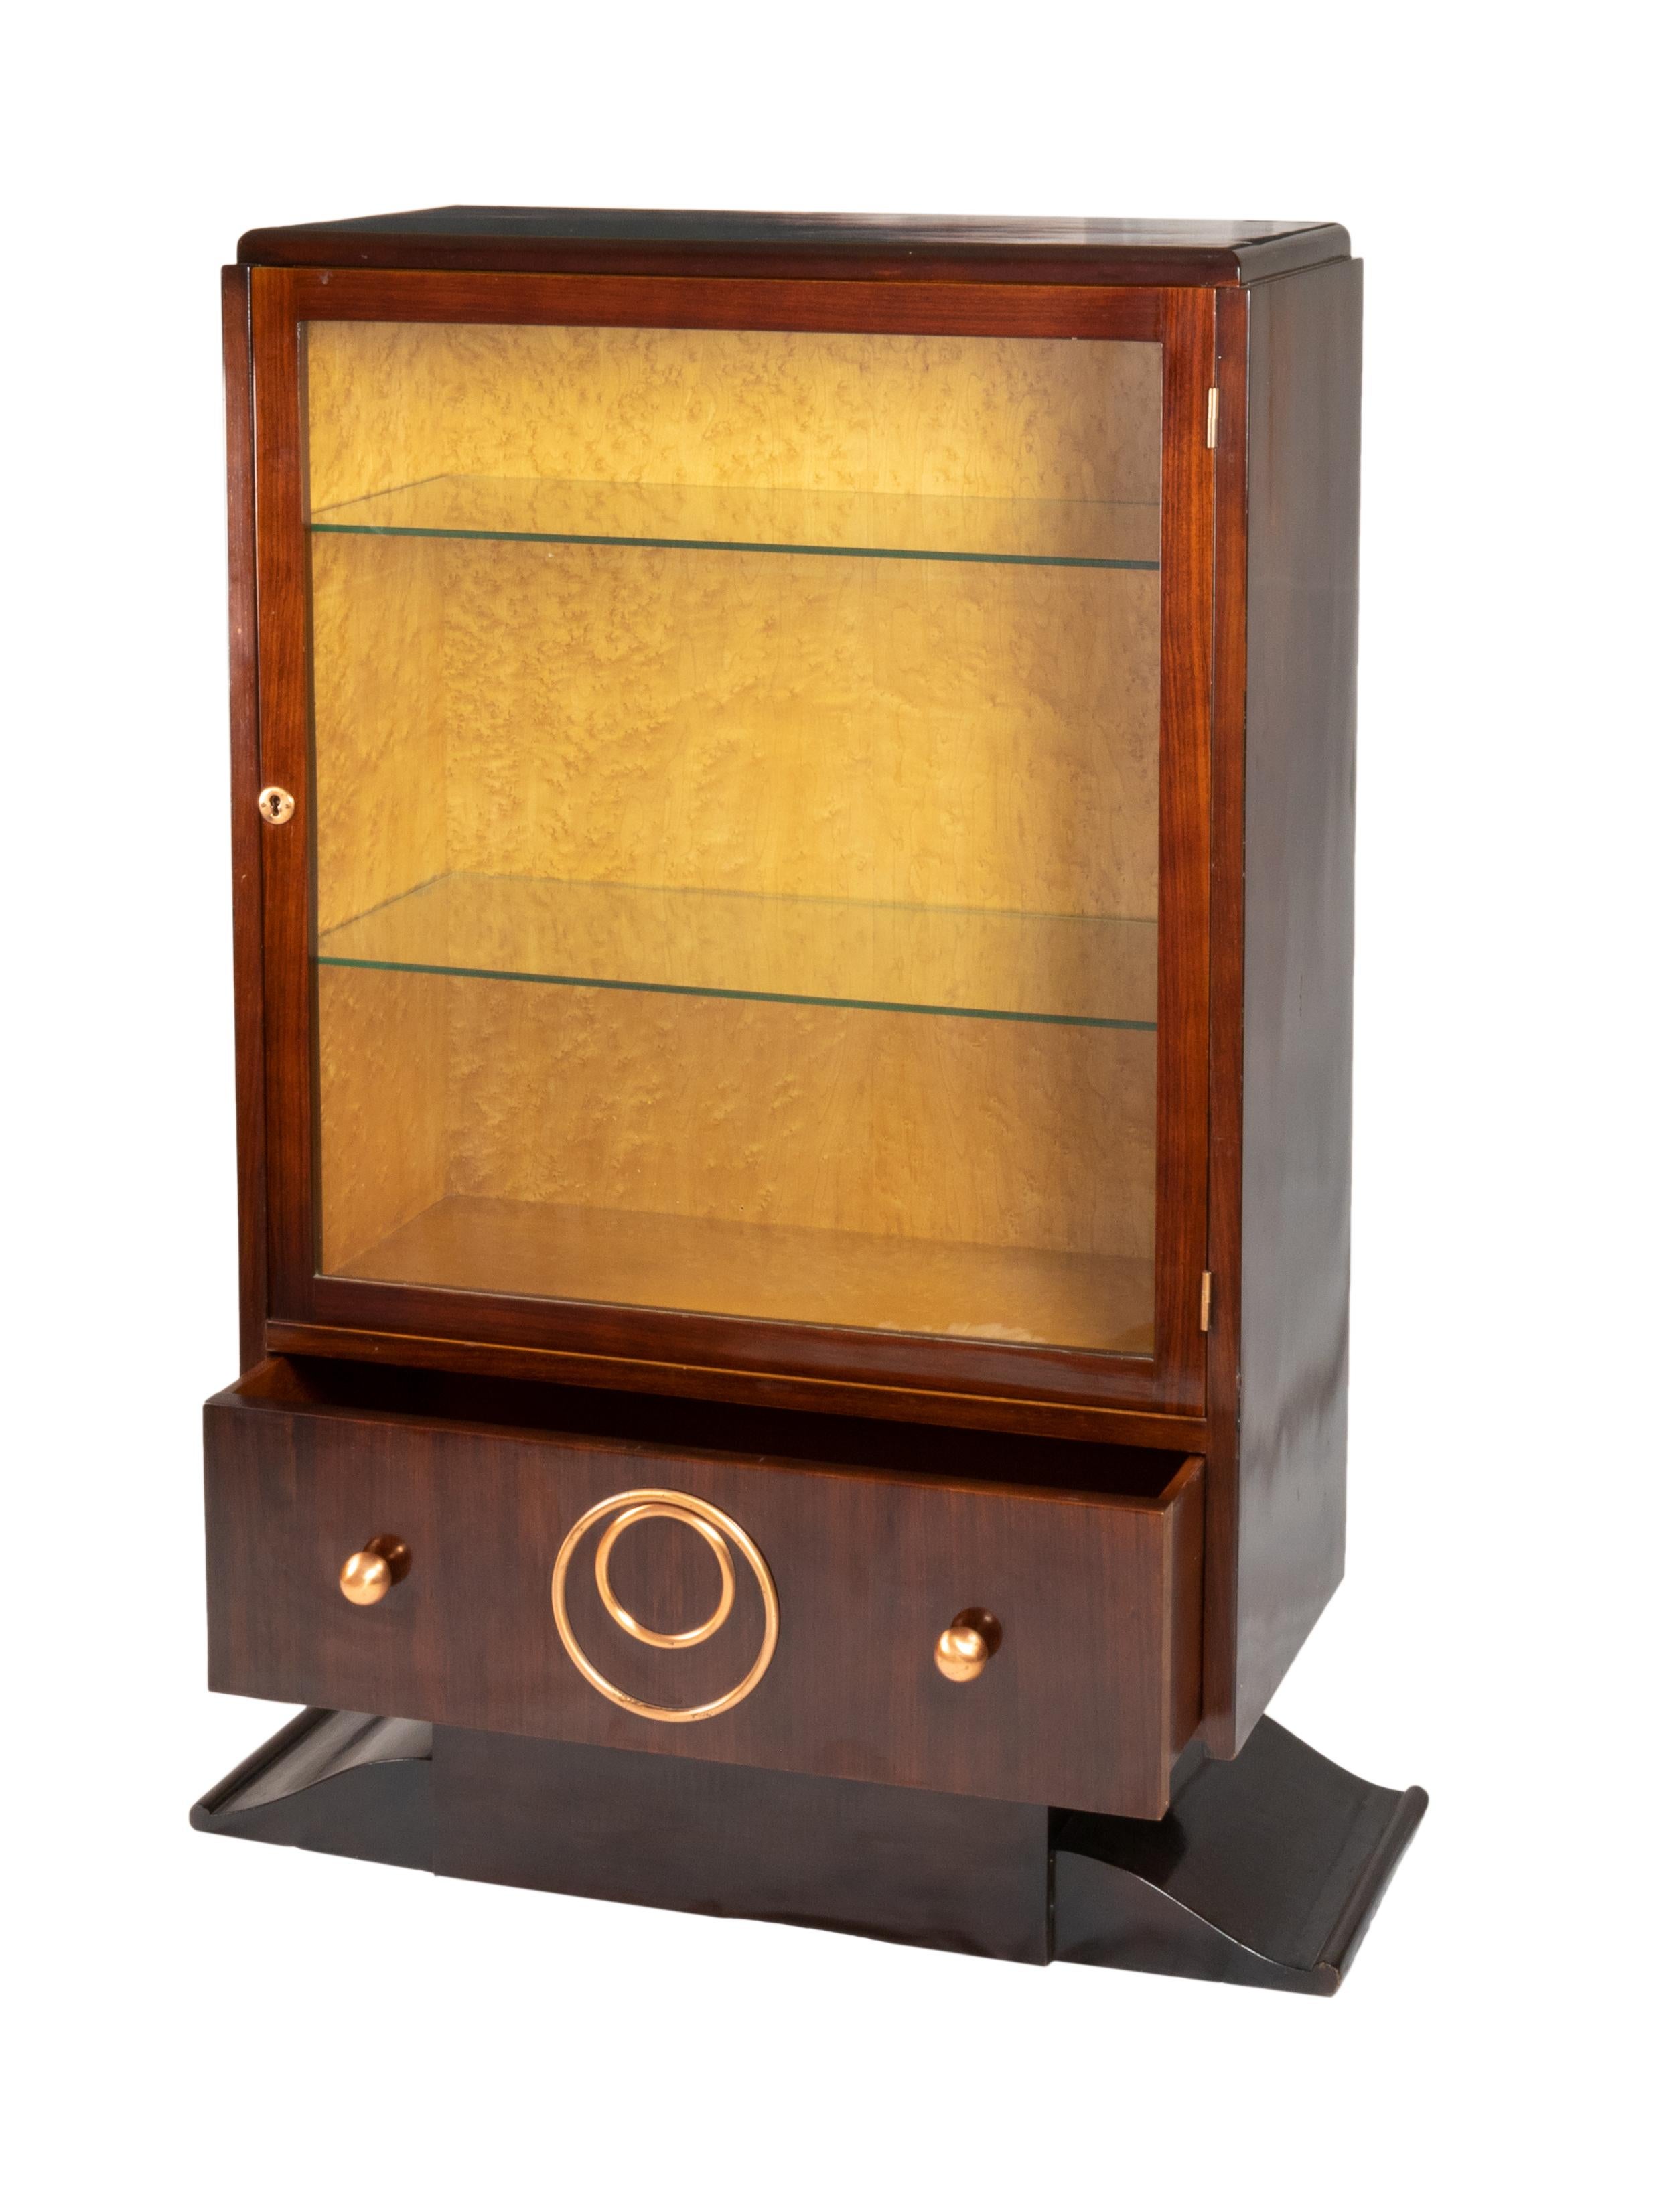 A superb Art Deco showcase cabinet with copper details and handles, tempered glass shelves and american walnut interior, perfect and timeless design from the Art Deco Era.
Height 130 cm Top length 80 cm Foot-to-foot length 94.5 cm Width 40 cm